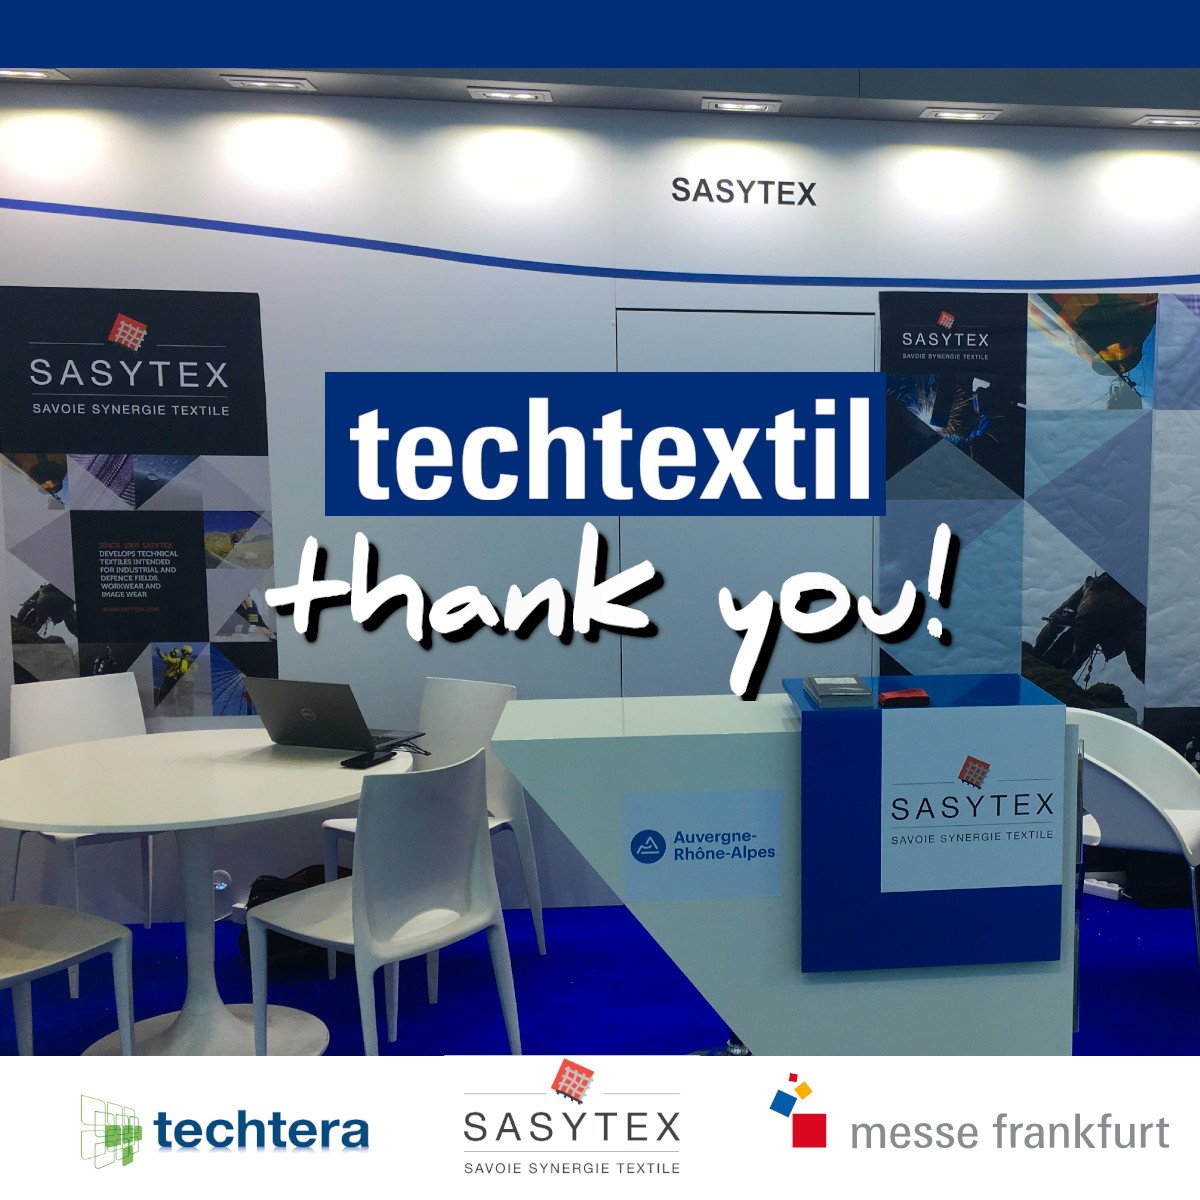 Thank you for visiting our booth!